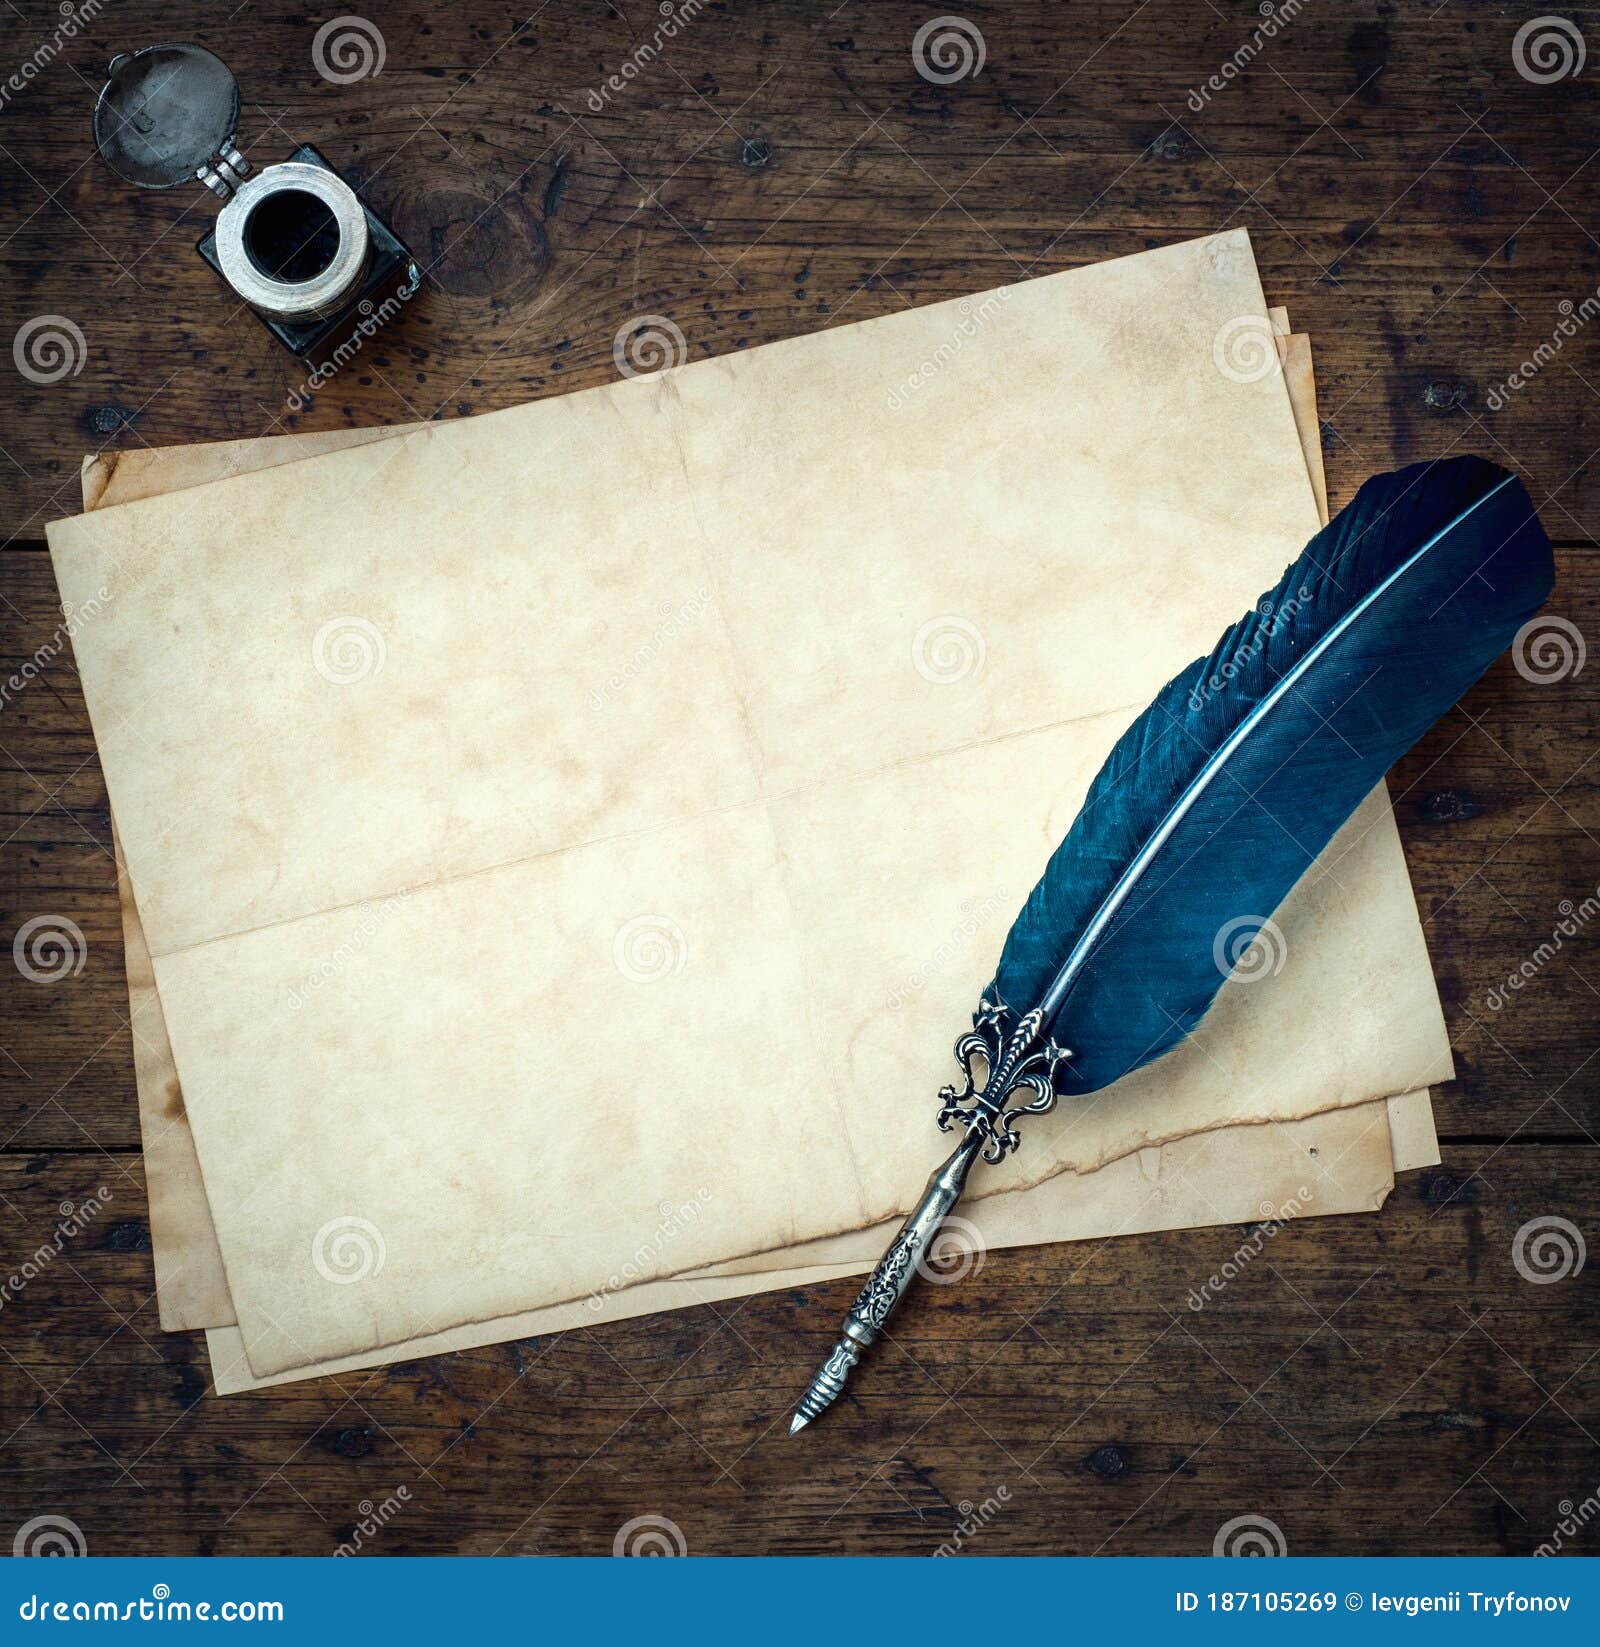 old quill pen, and old paper blank sheet and vintage inkwell on wooden desk in the old office . retro style. conceptual background